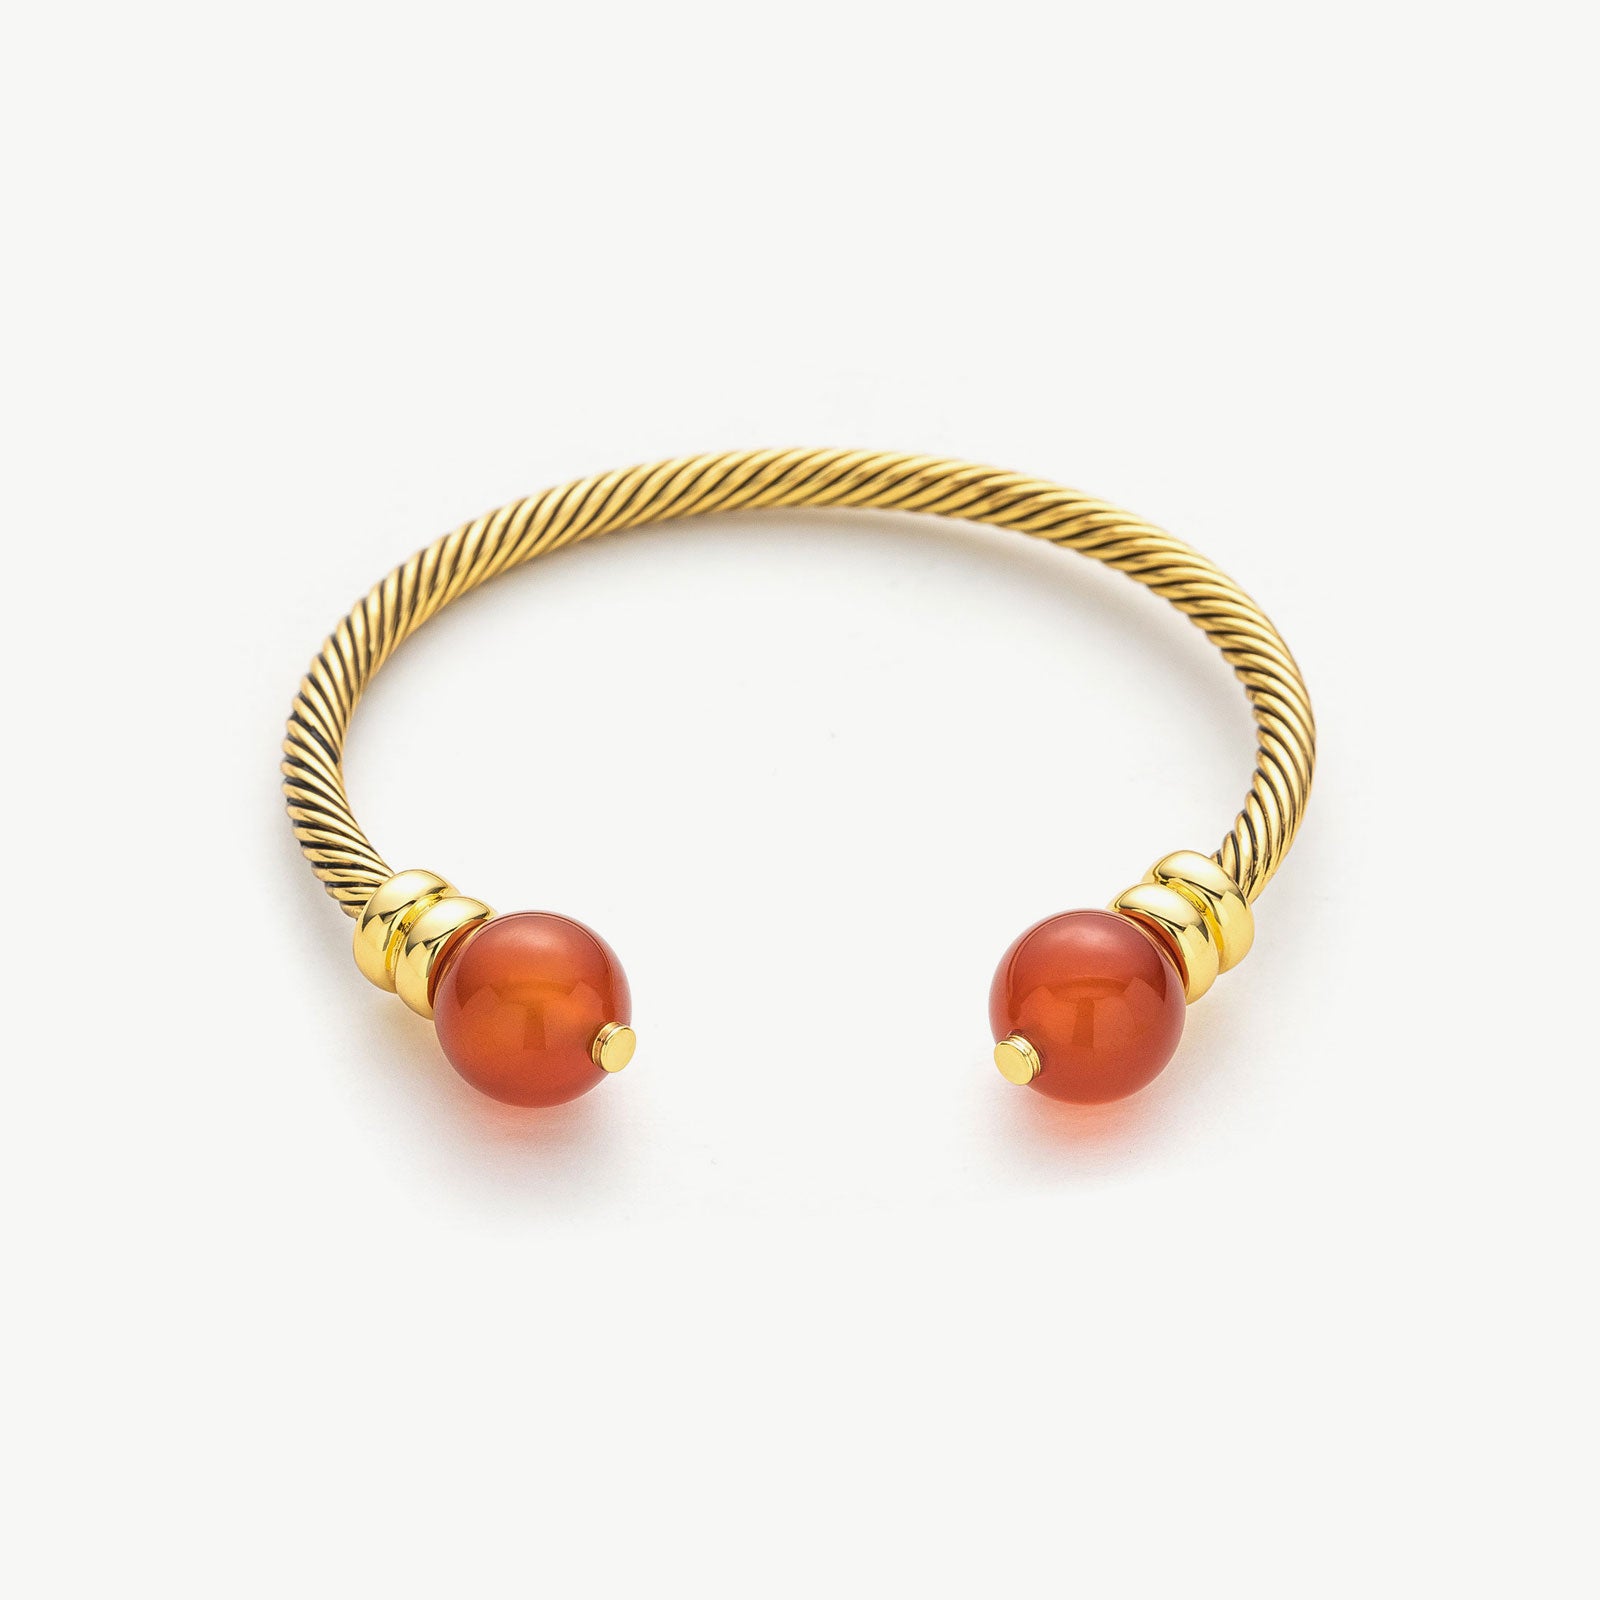 Agate Bracelet in Gold with Red Gemstones, exuding timeless elegance with a vintage-inspired design, this bracelet features rich red agate gemstones set in a delicate gold setting for a luxurious and refined accessory